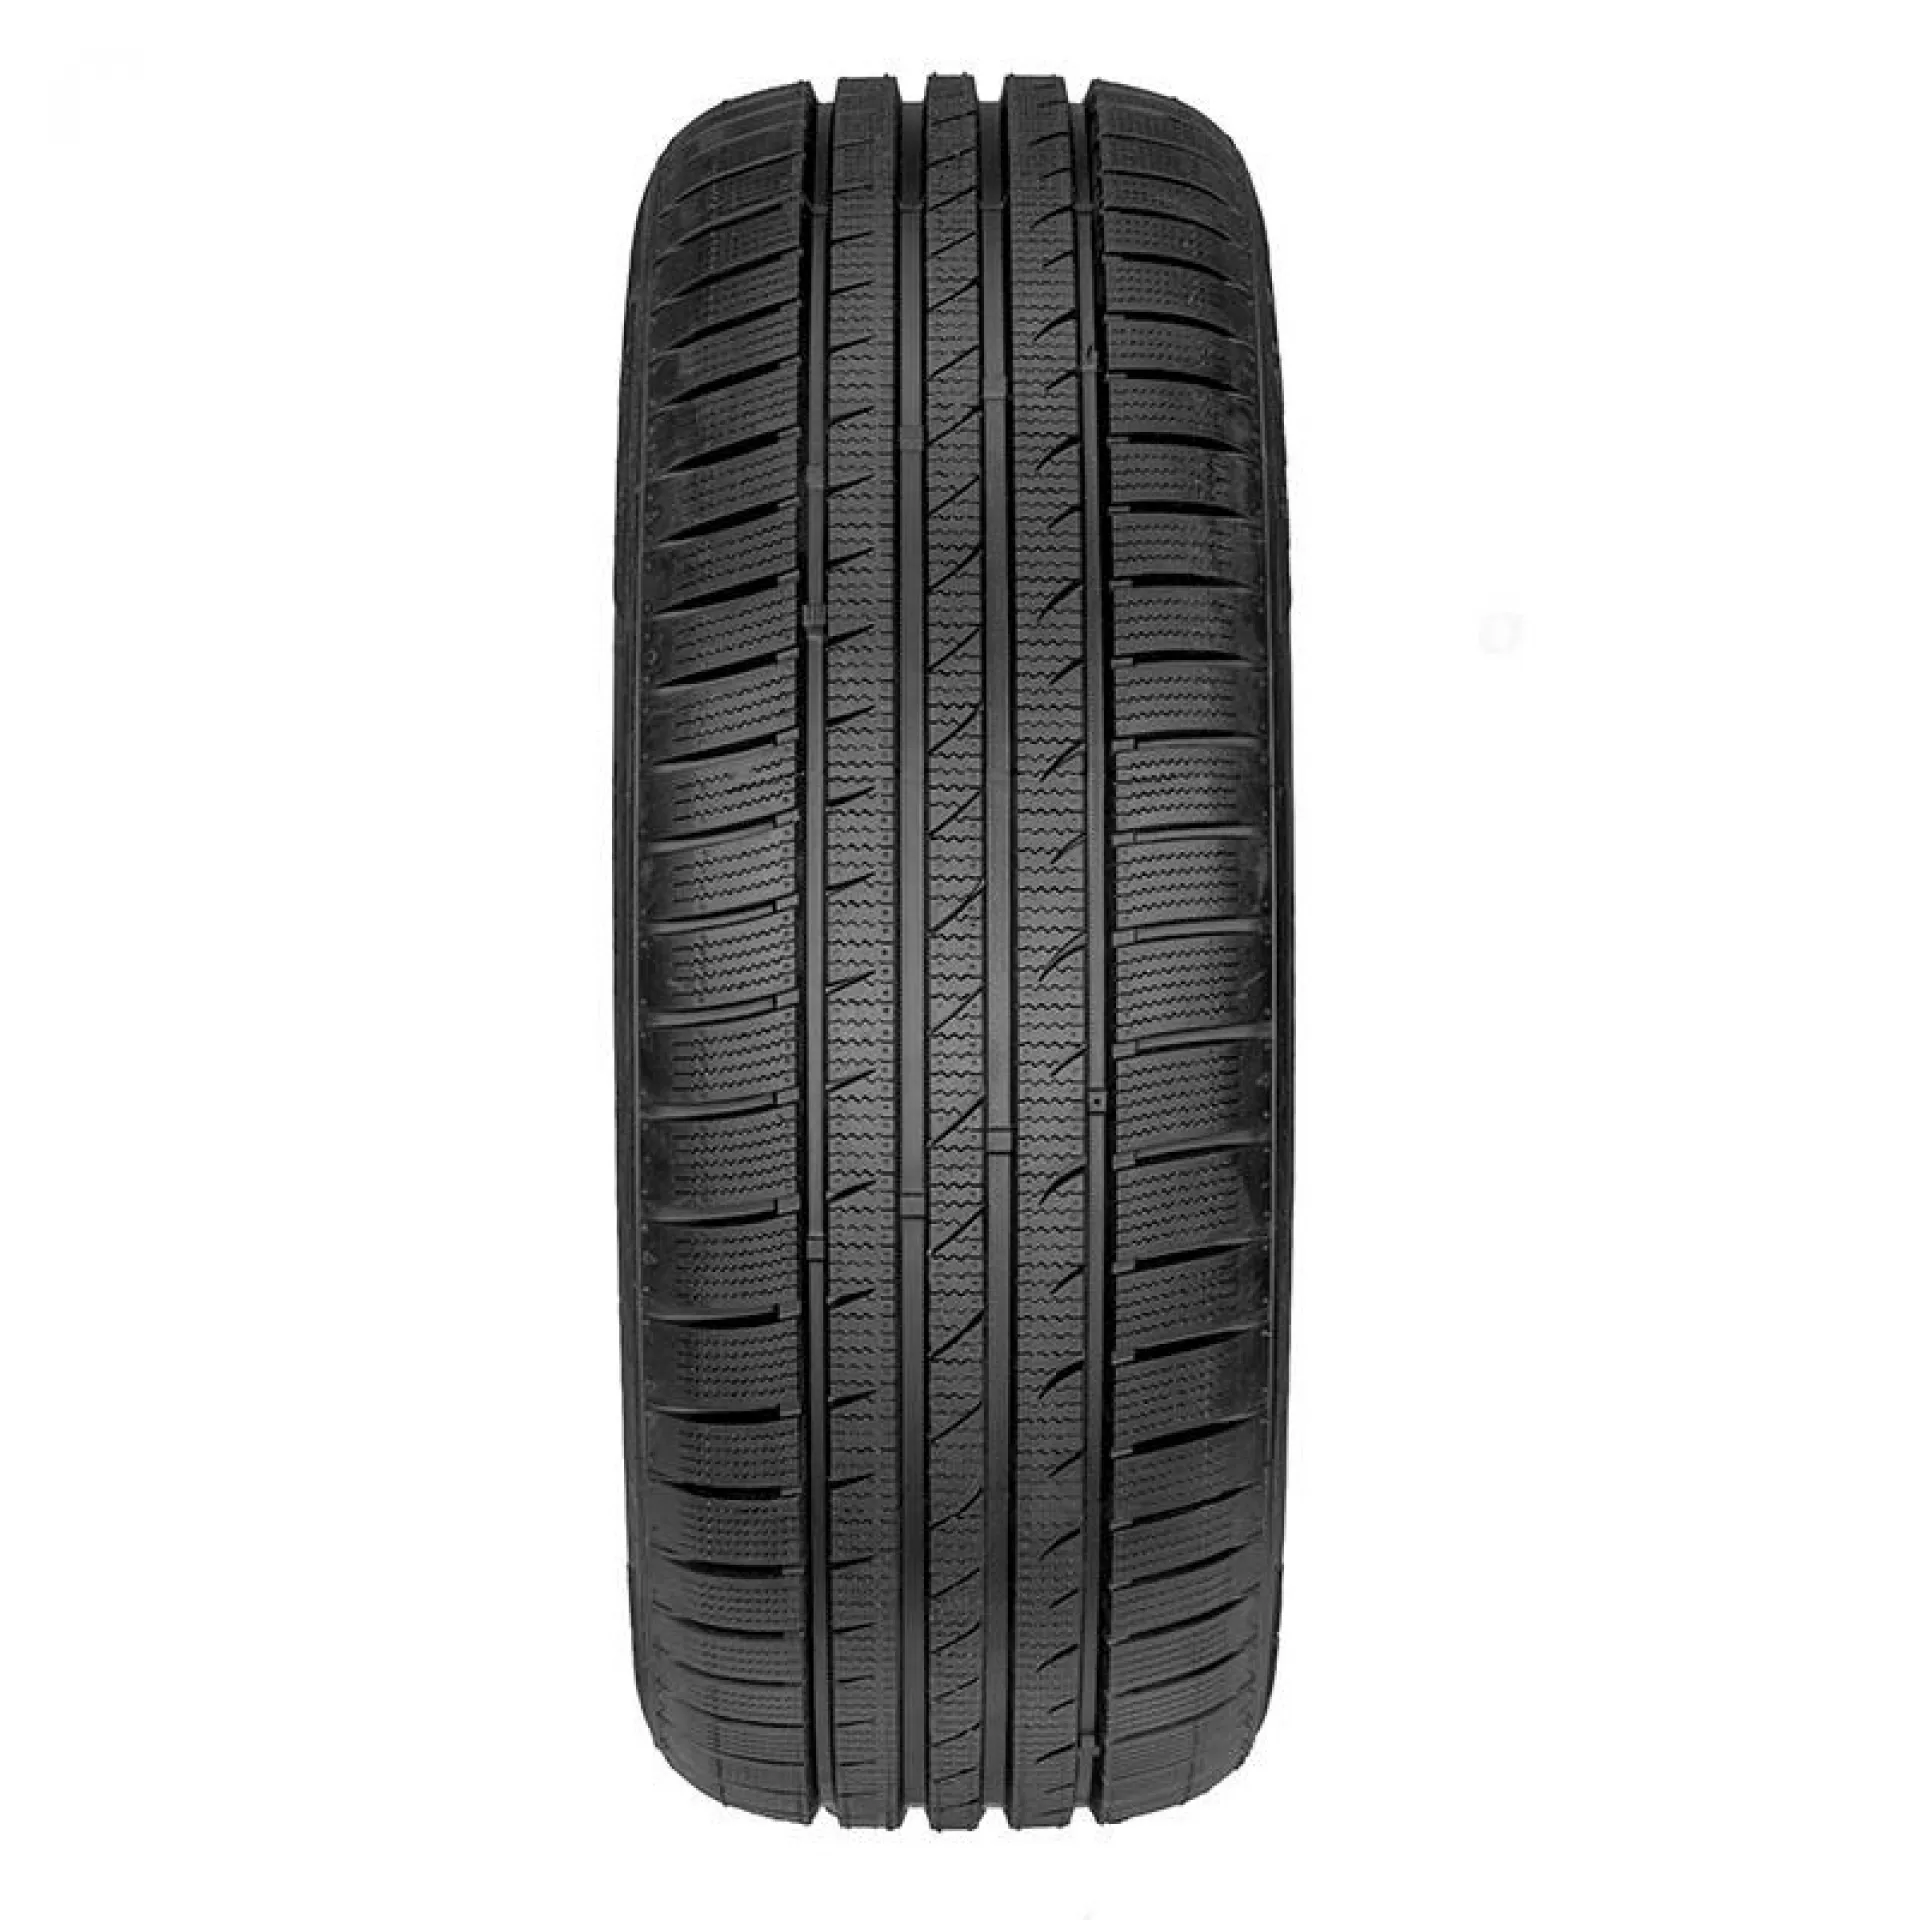 Fortuna Gowin UHP2 205/40R17 84V XL